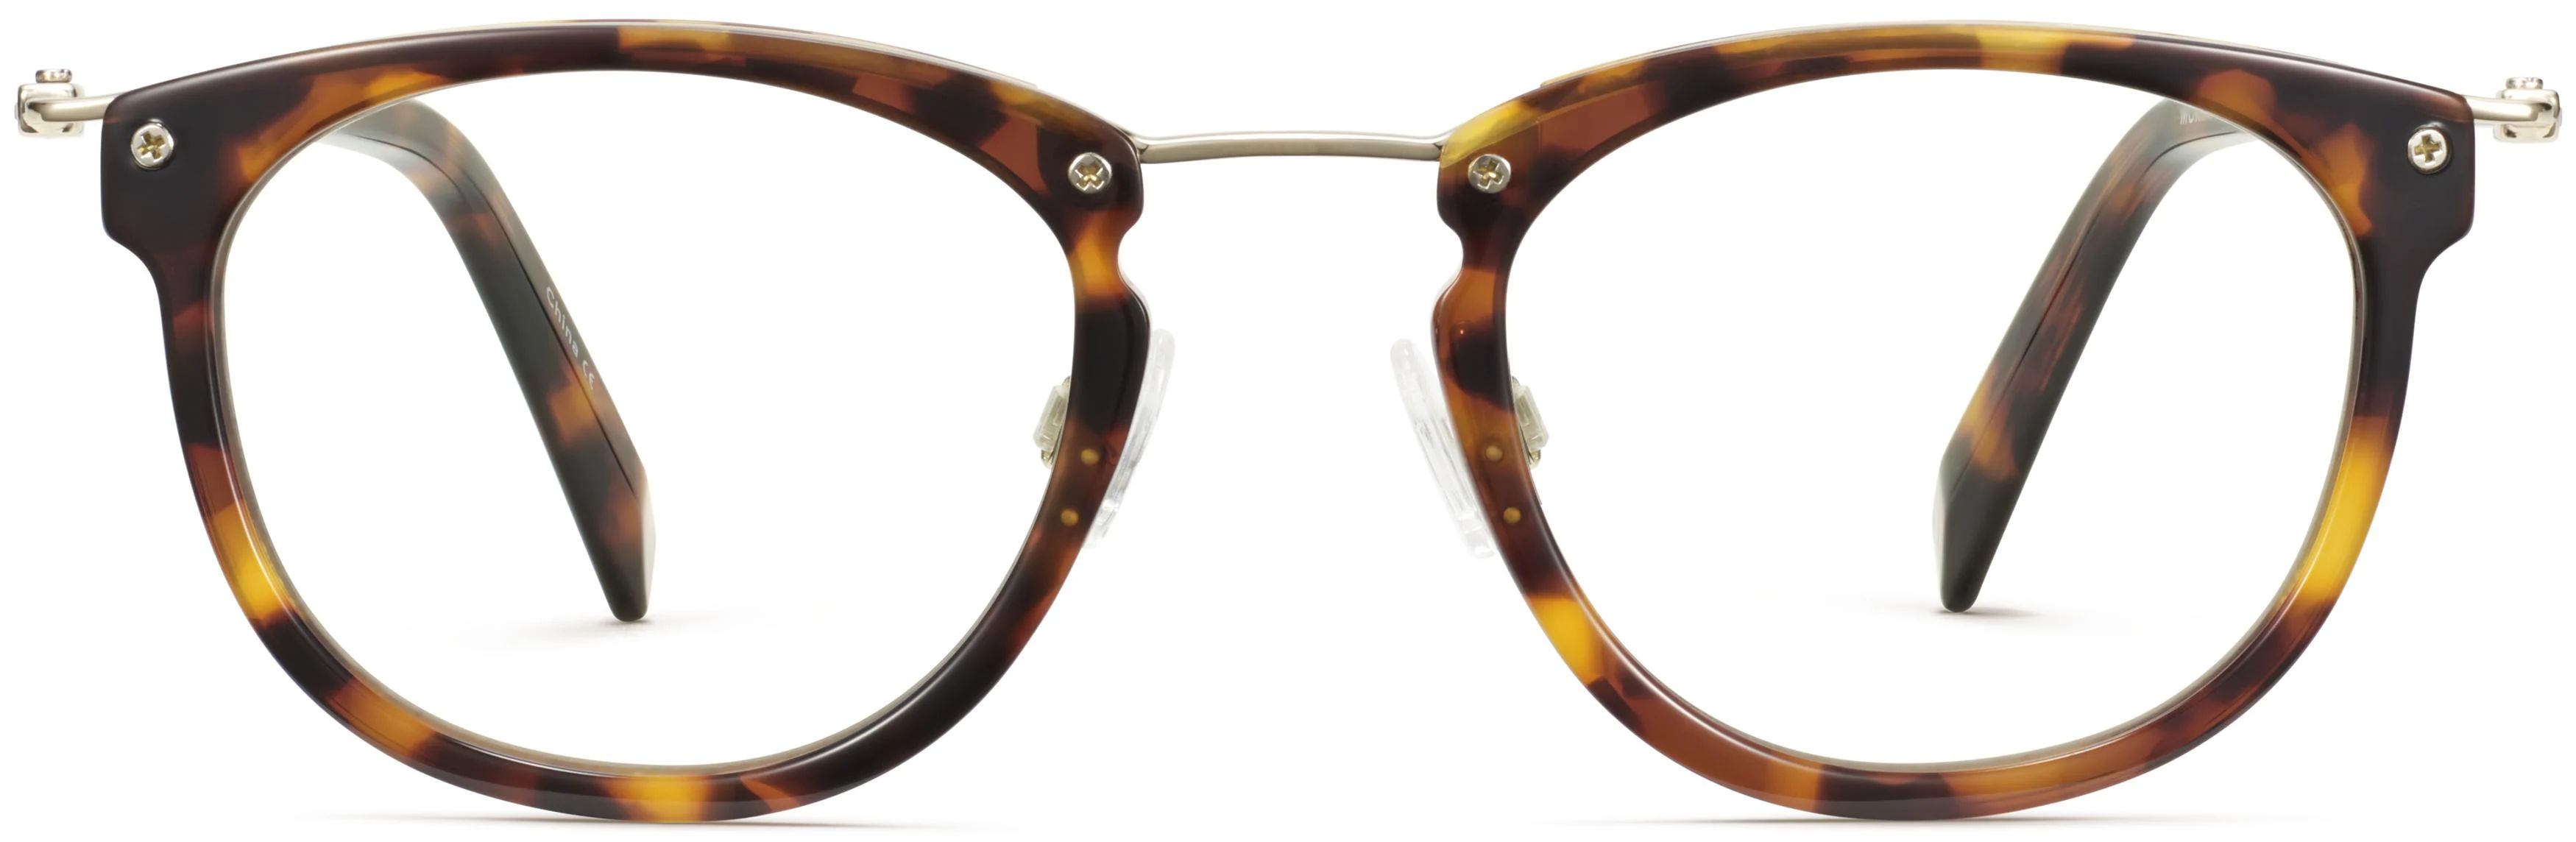 Moriarty Eyeglasses in Acorn Tortoise with Riesling | Warby Parker | Warby Parker (US)